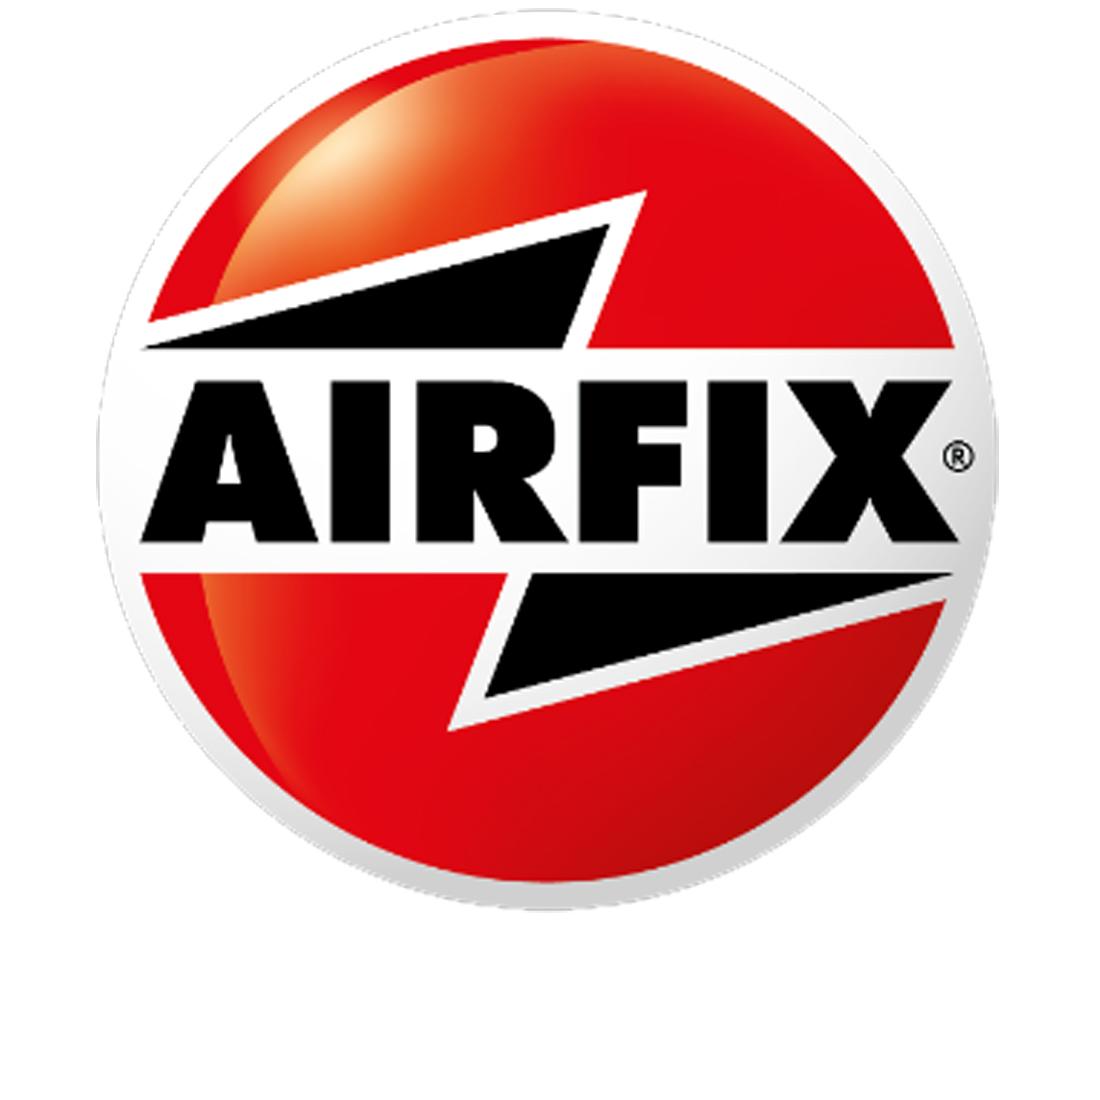 Airfix Catalogues and Puzzles